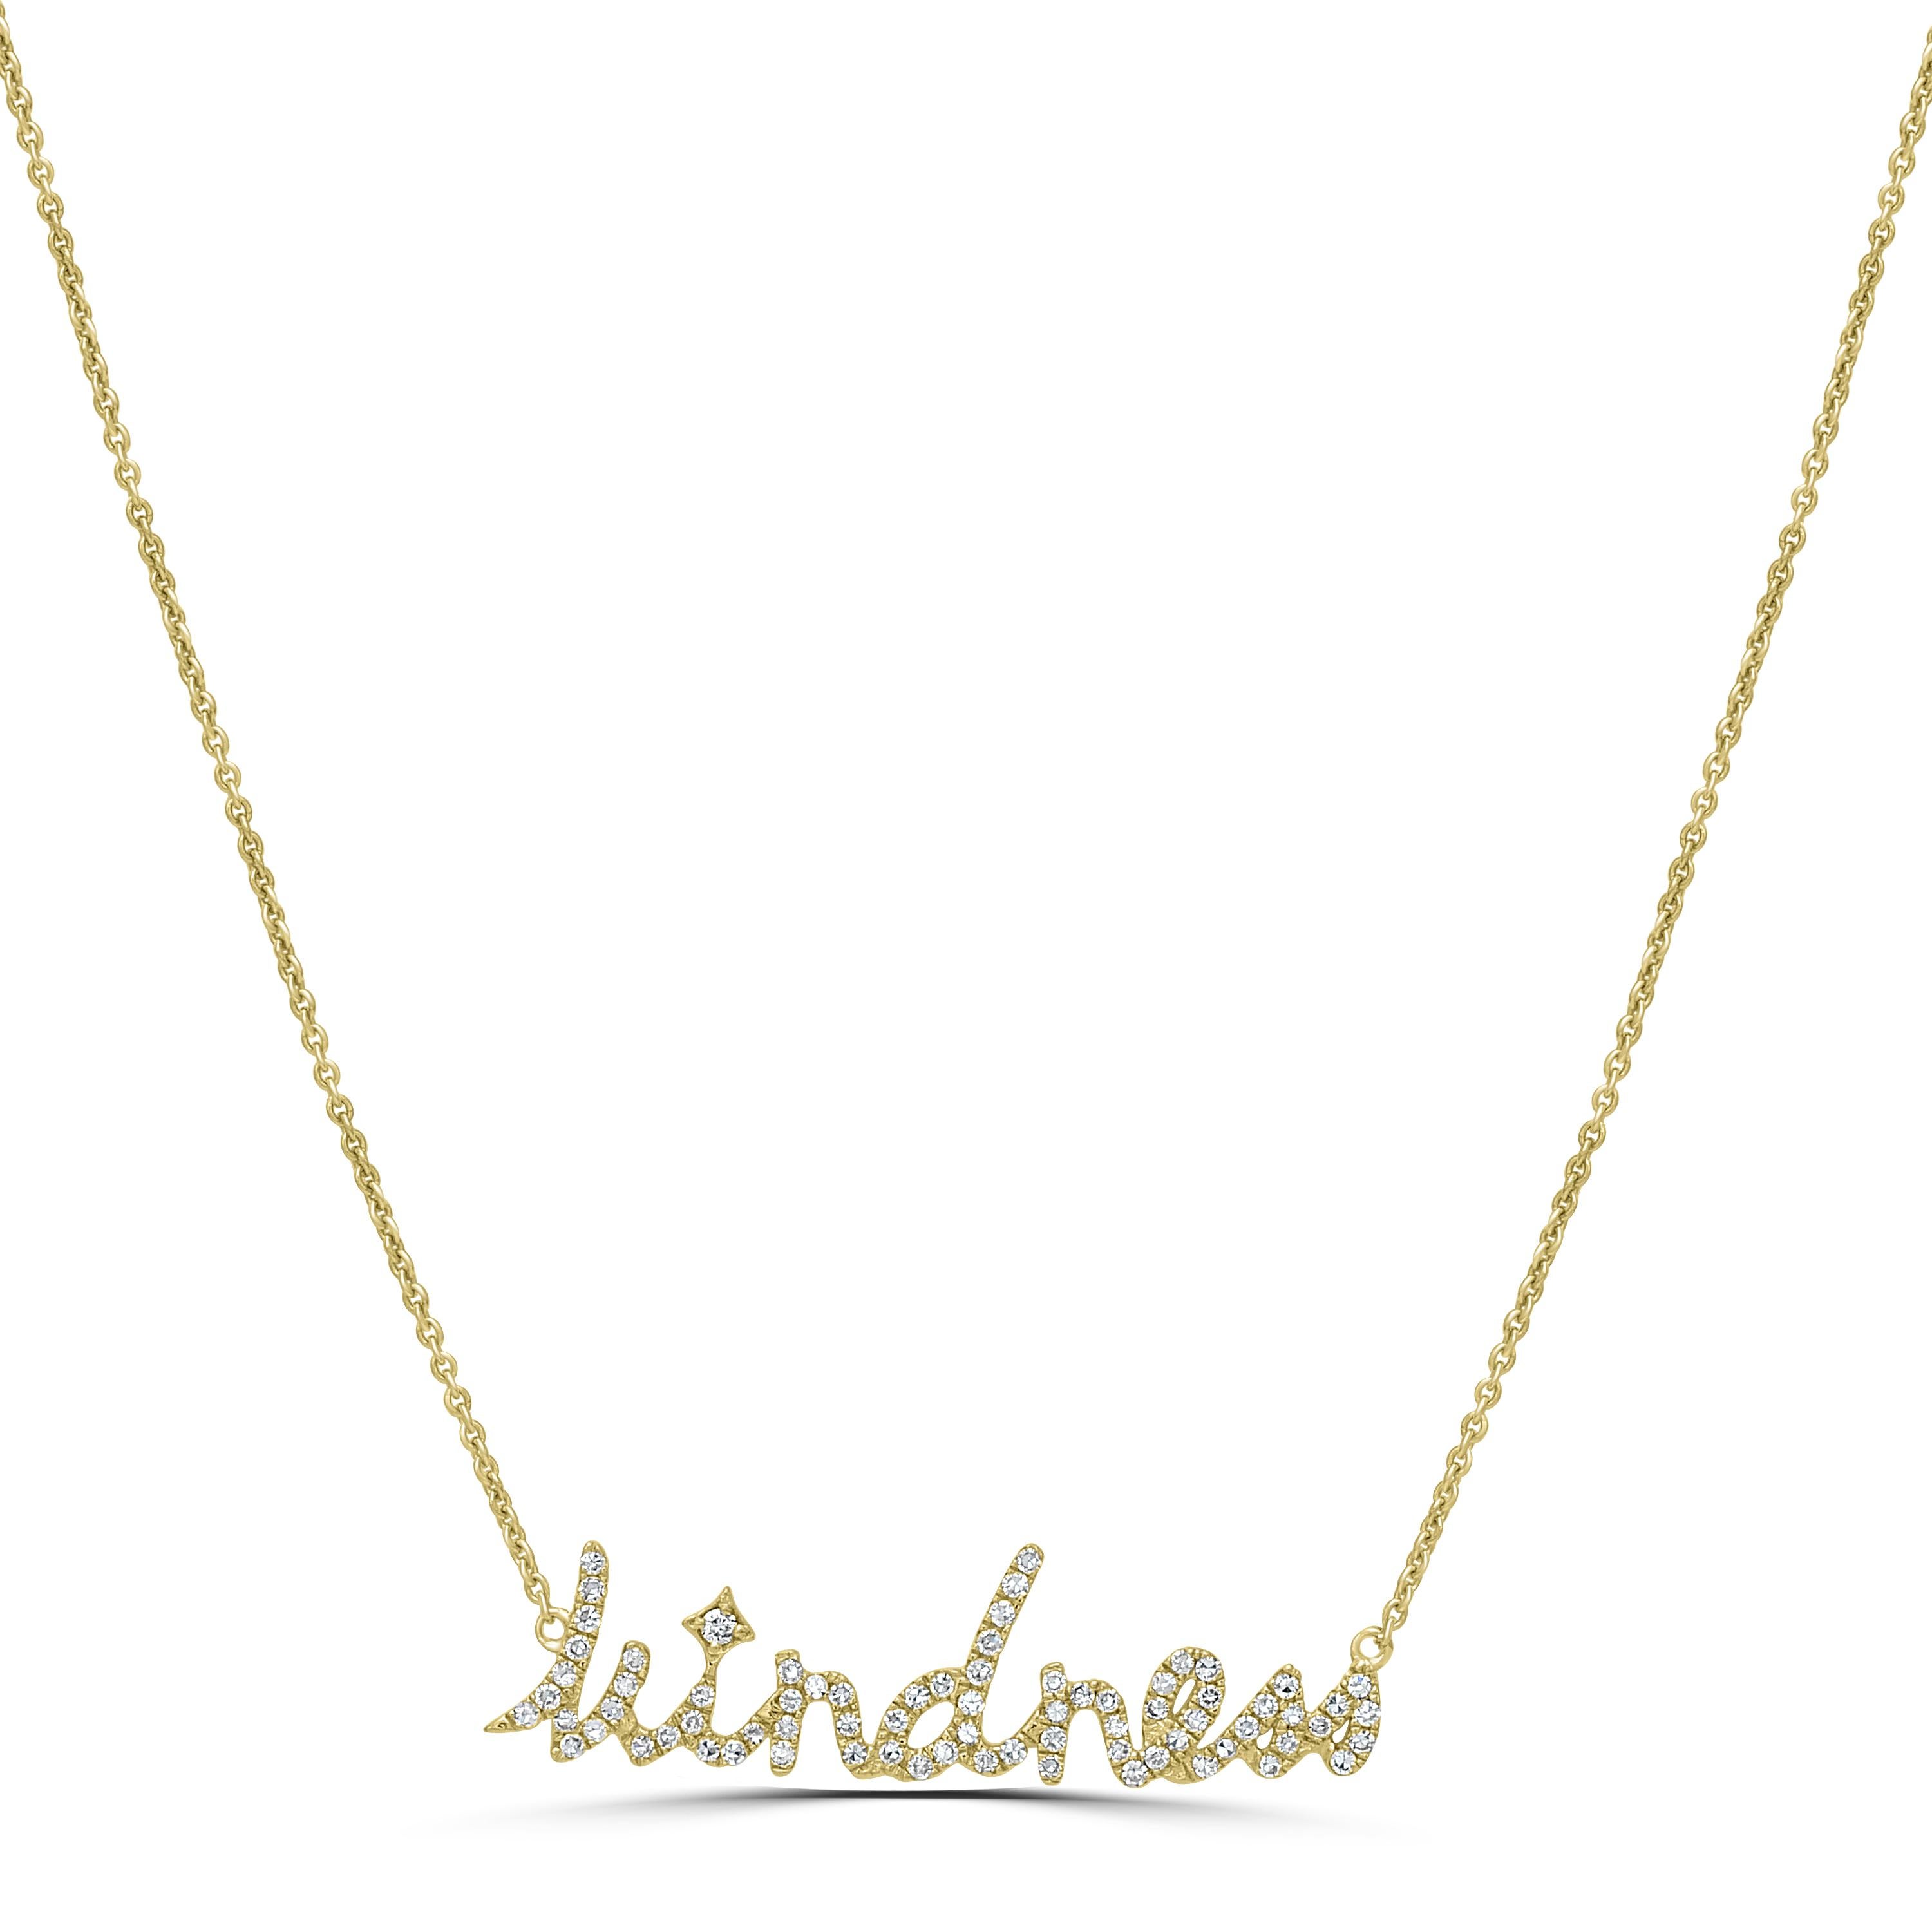 This 15 inches Kindness pendant necklace will add shine and warmth to your life. The Kindness inscribed pattern is fashioned in 14K Yellow Gold and studded with 0.22 Cts round full-cut and single-cut diamonds. This necklace, suspended from a gold